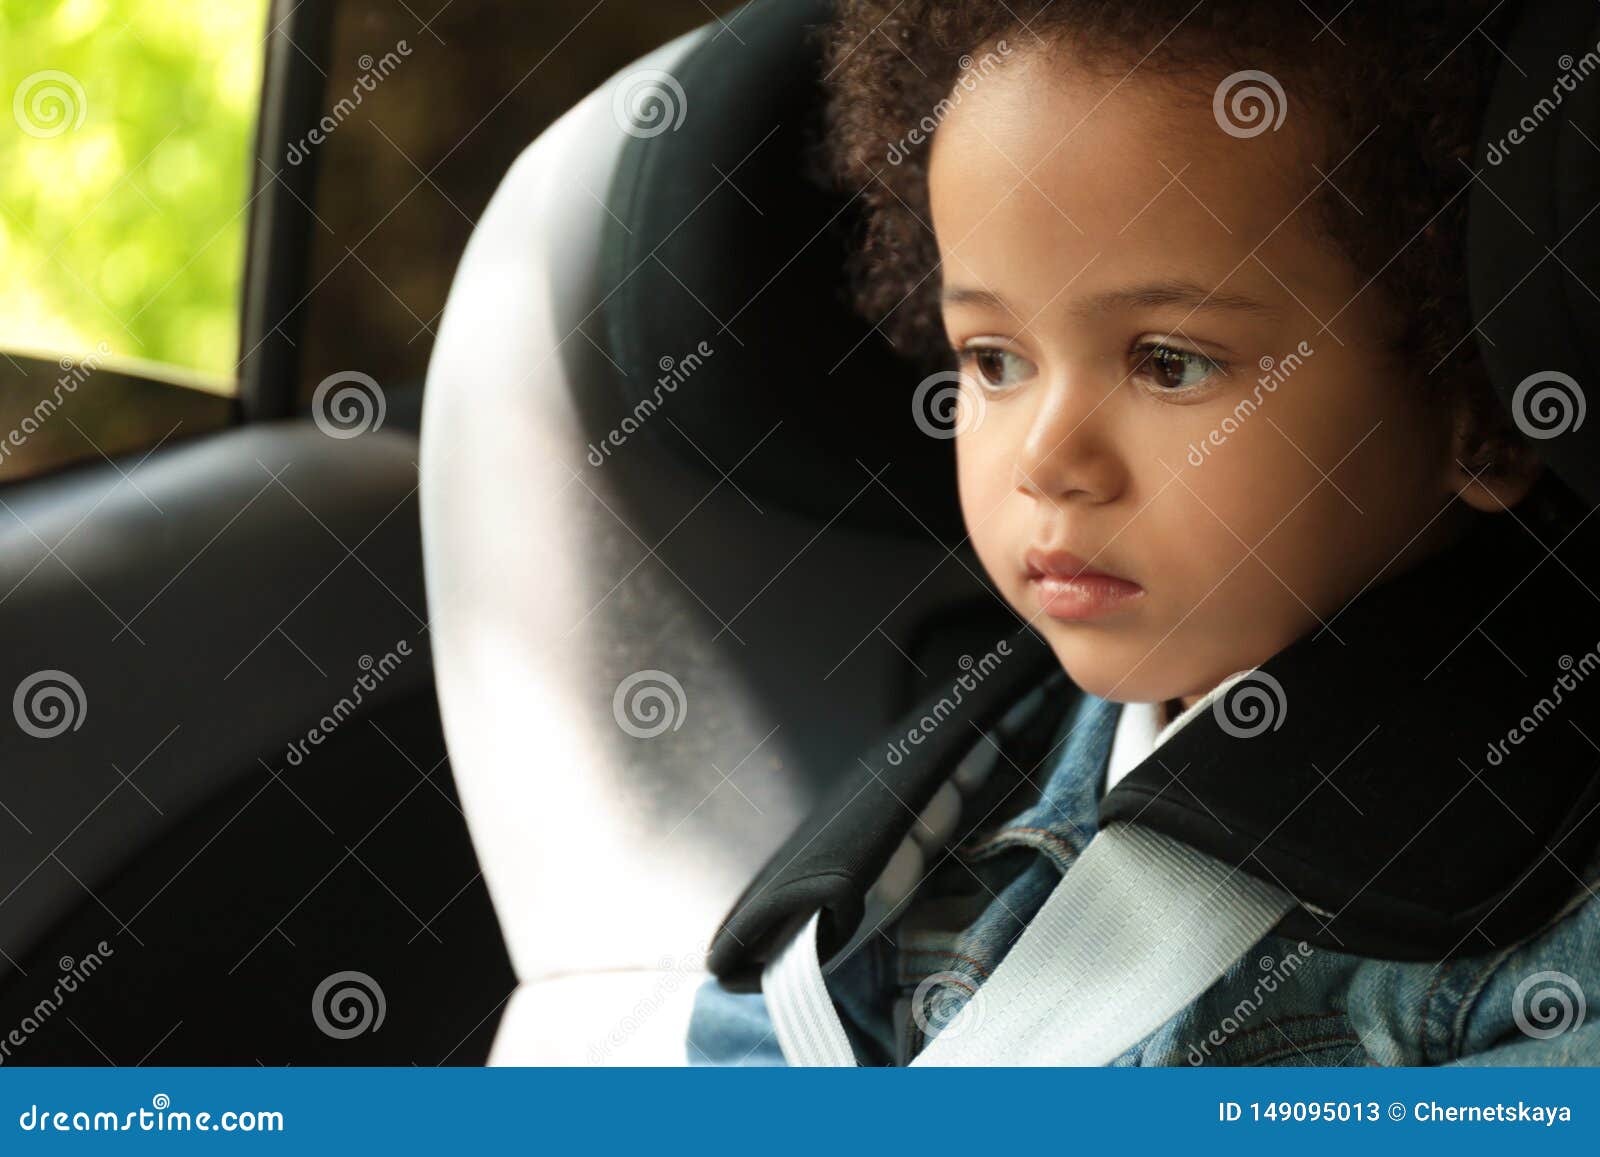 Cute African-American Girl Sitting in Safety Seat Alone. Child in ...